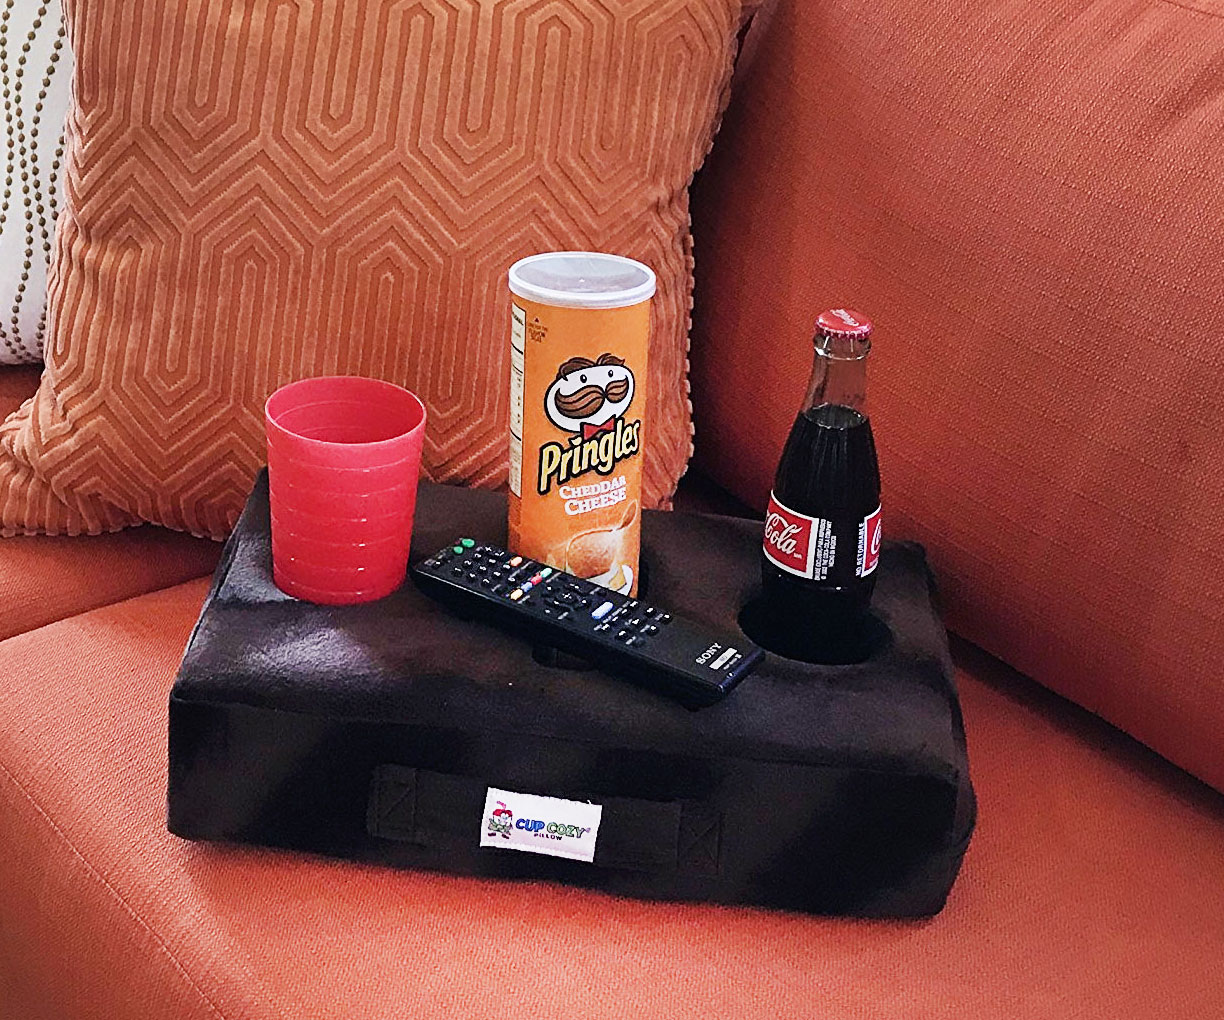 The Cup Holder Couch Pillow